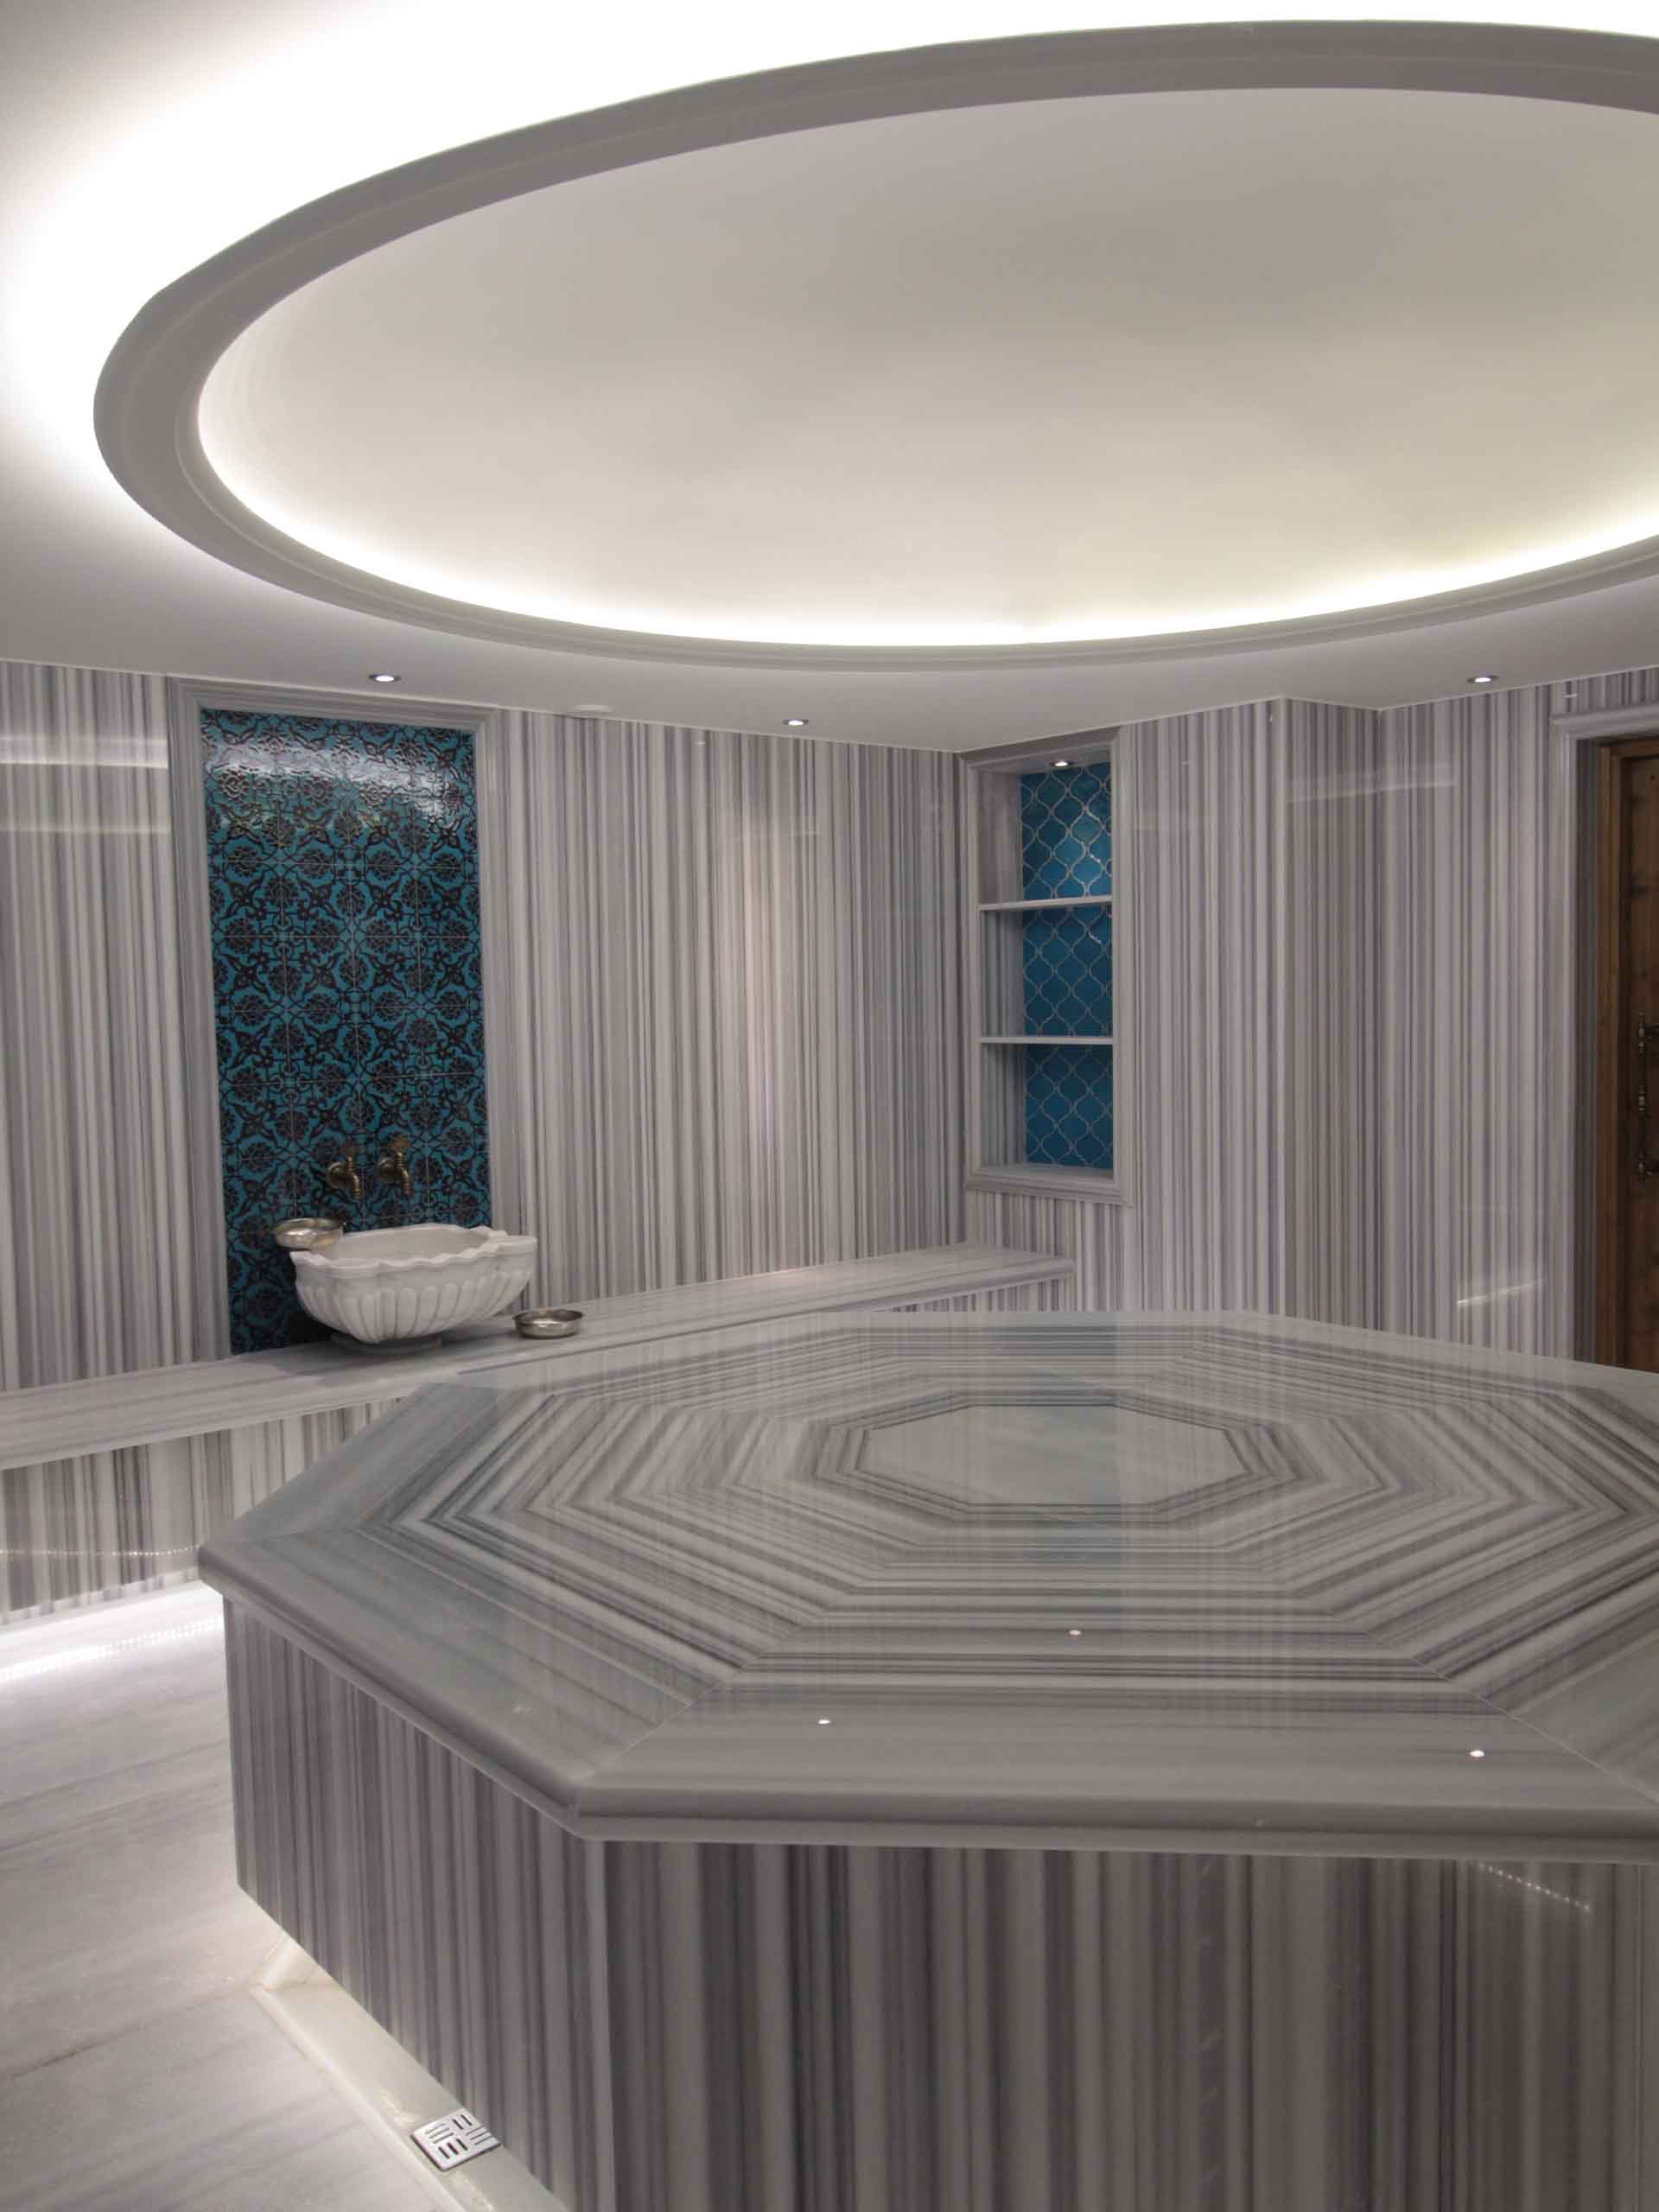 Indulge in Ingolstadt Luxury - Purchase this exclusive hammam experience. Immerse yourself in brilliant design without compromising on cost.